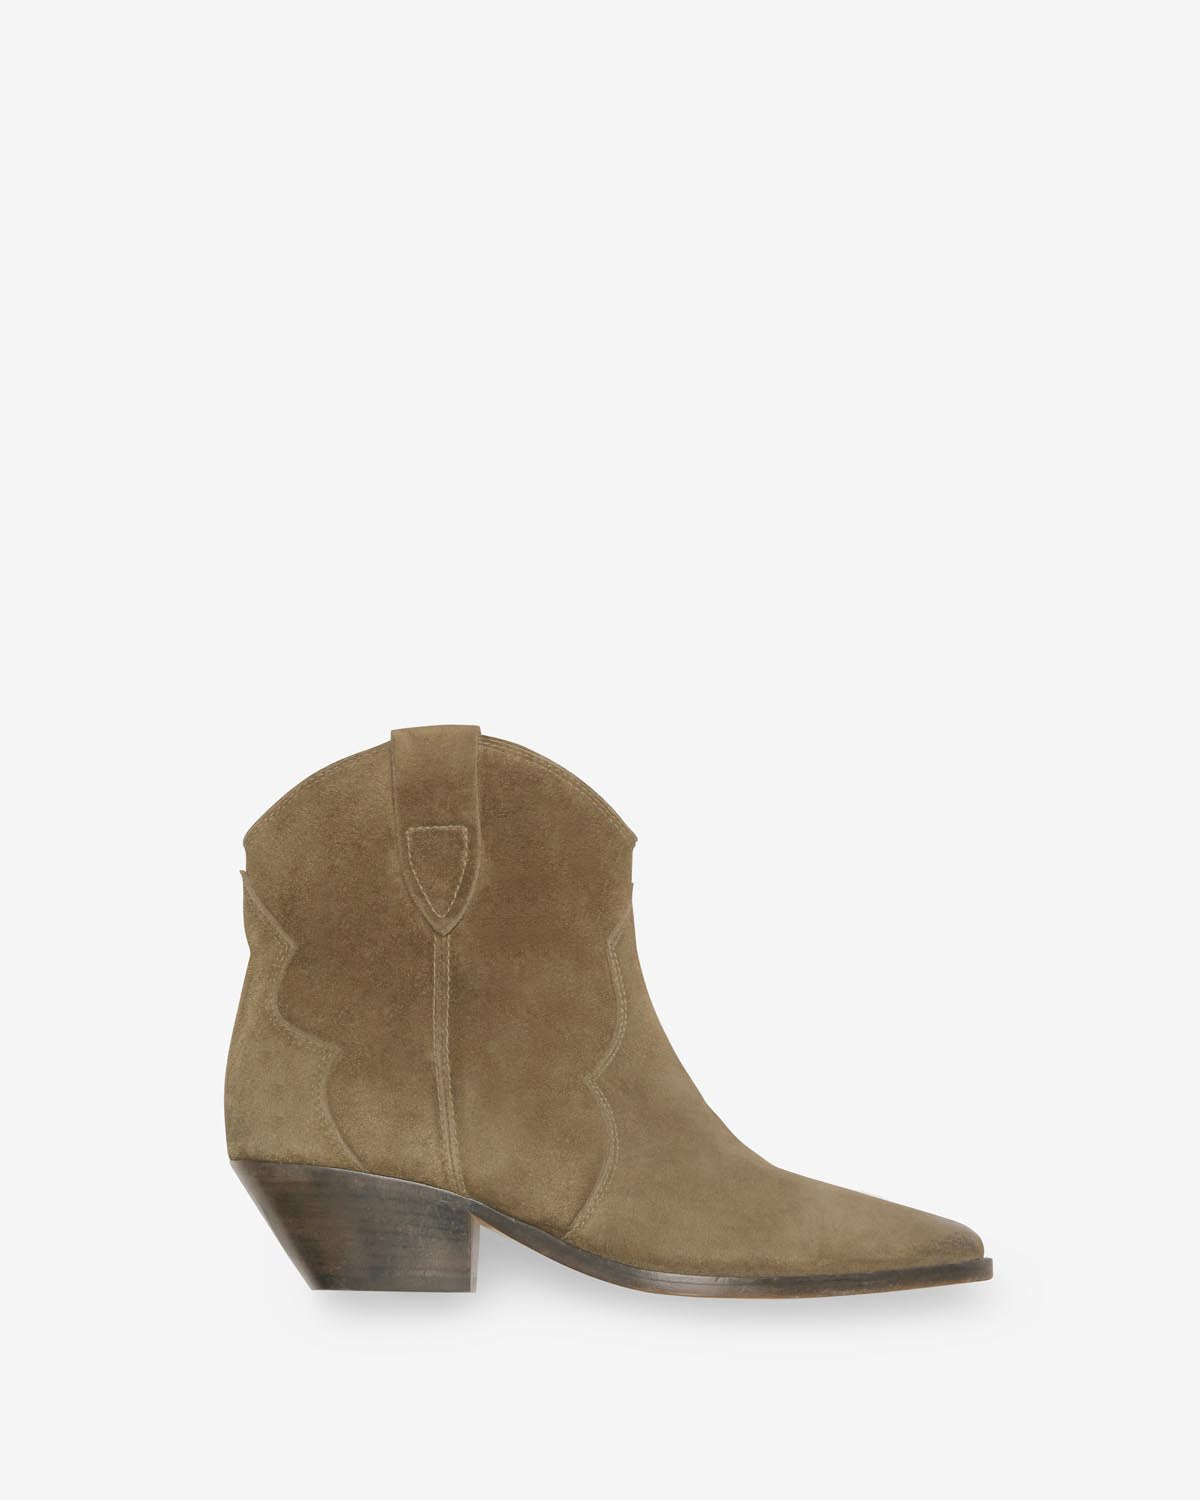 Boots dewina Woman Taupe 5